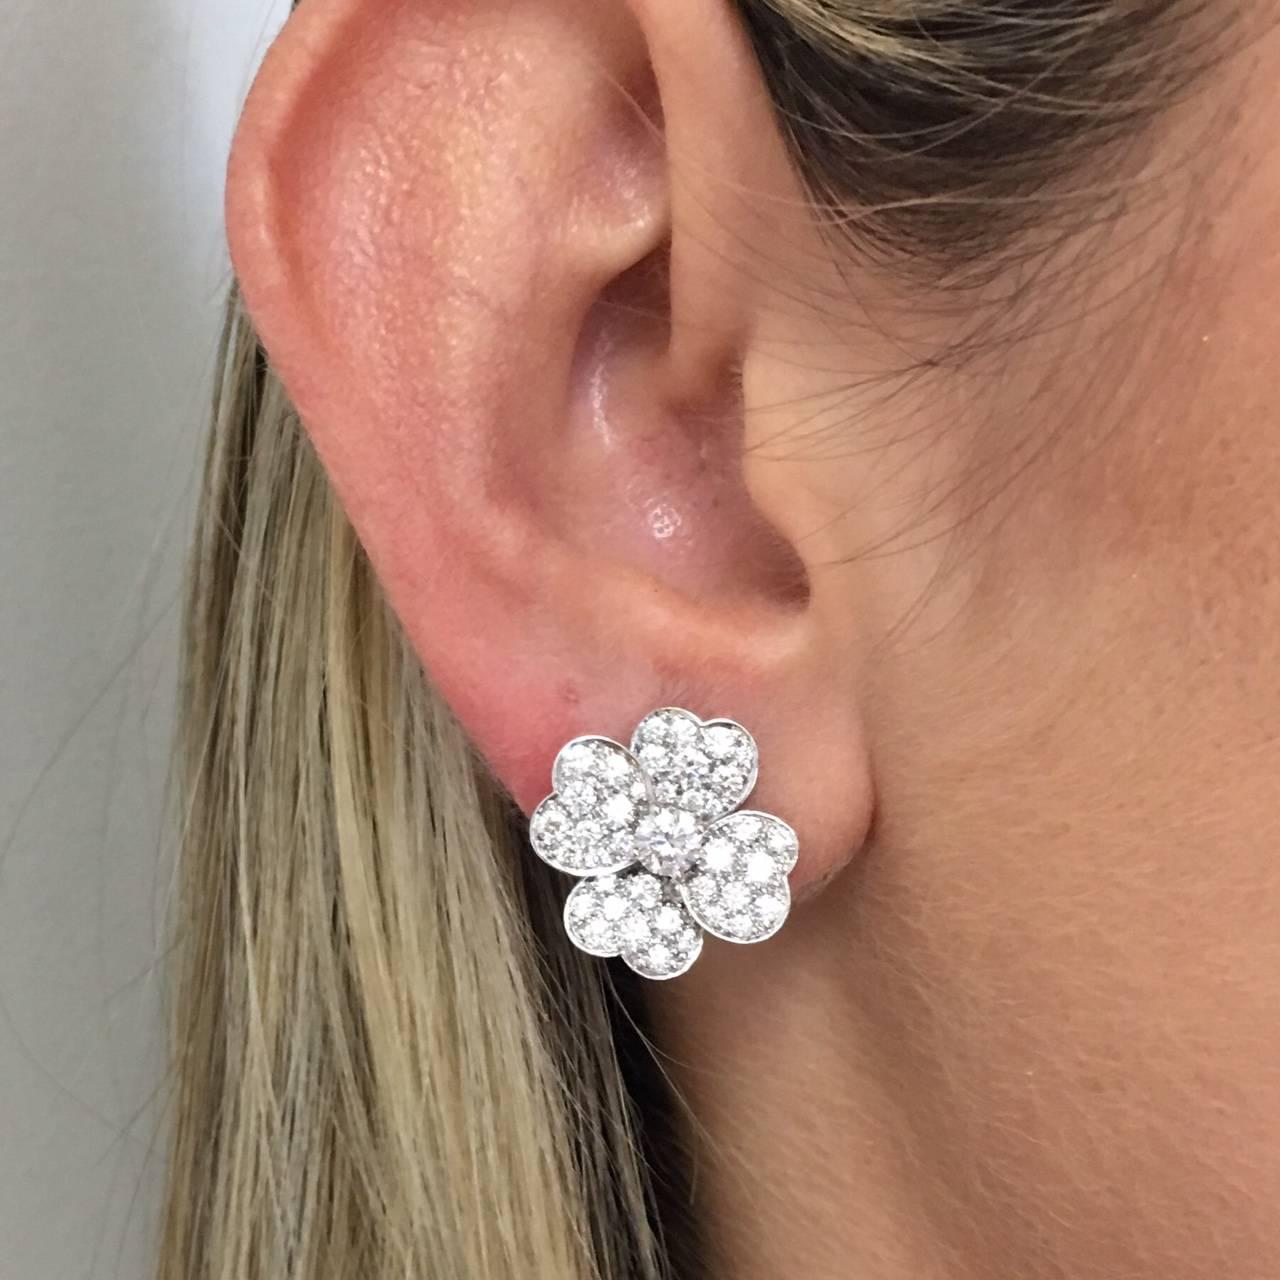 As new, mint condition Four Heart shape Petal Earrings by the great French designer Van Cleef & Arpels.  The earrings are part of the Cosmo Collection.
Composed of four heart-shaped petals,Cosmos is inspired by one of Van Cleef & Arpels' signature